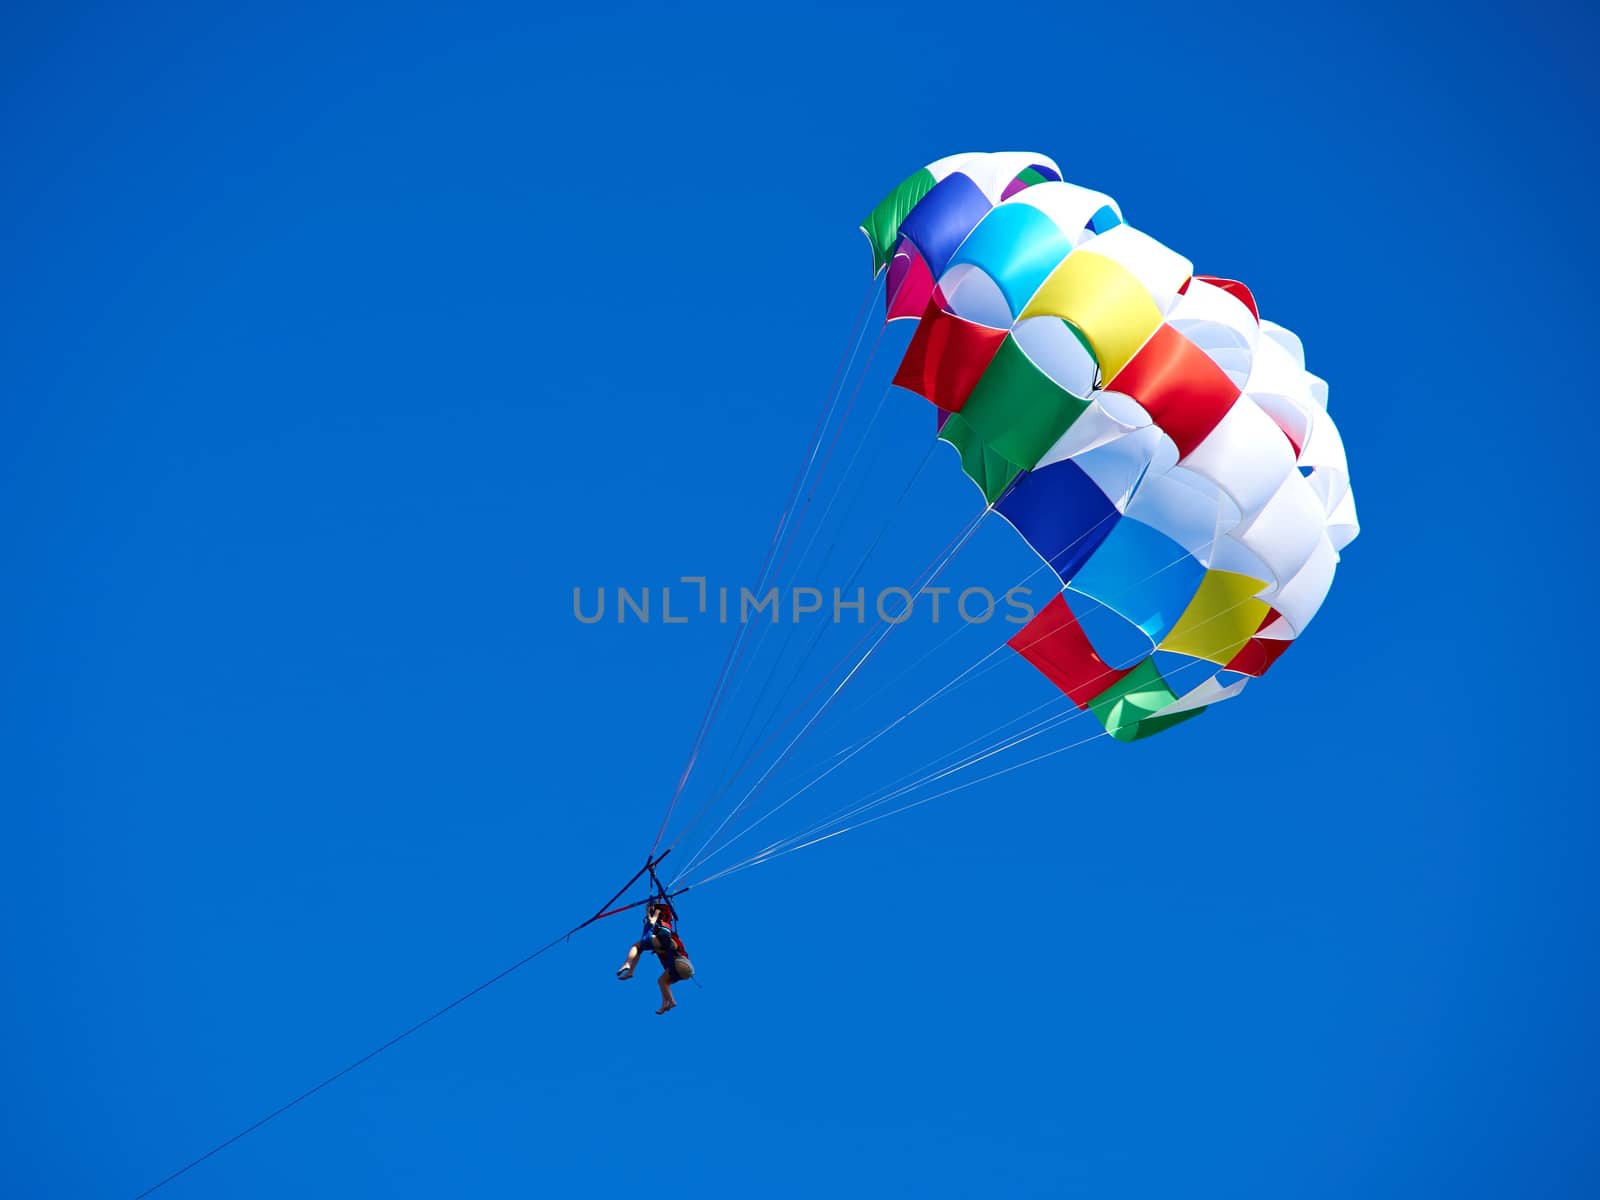 Parasailing popular vacation activity in summer resorts  by Ronyzmbow